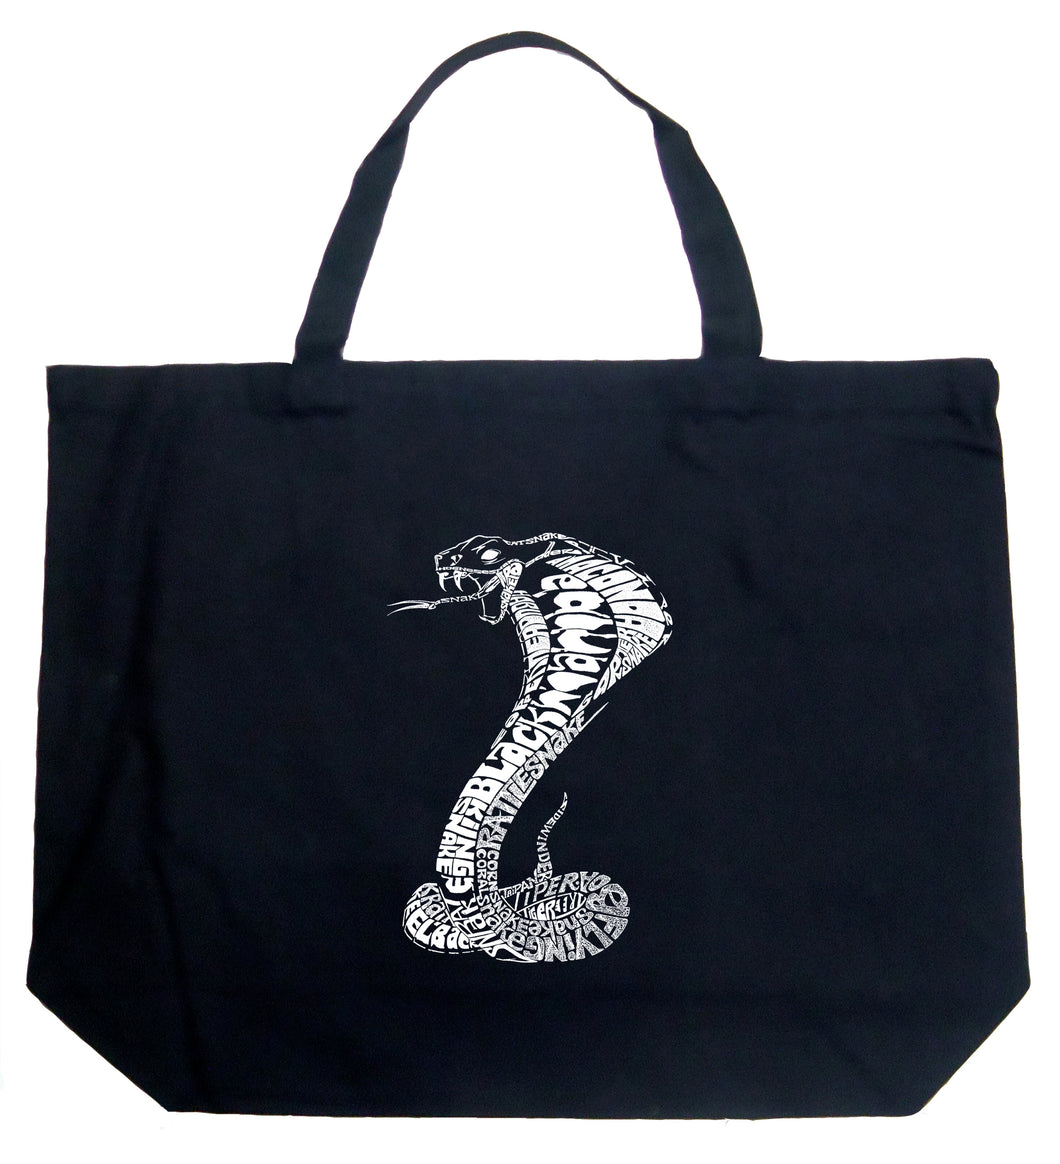 Types of Snakes - Large Word Art Tote Bag